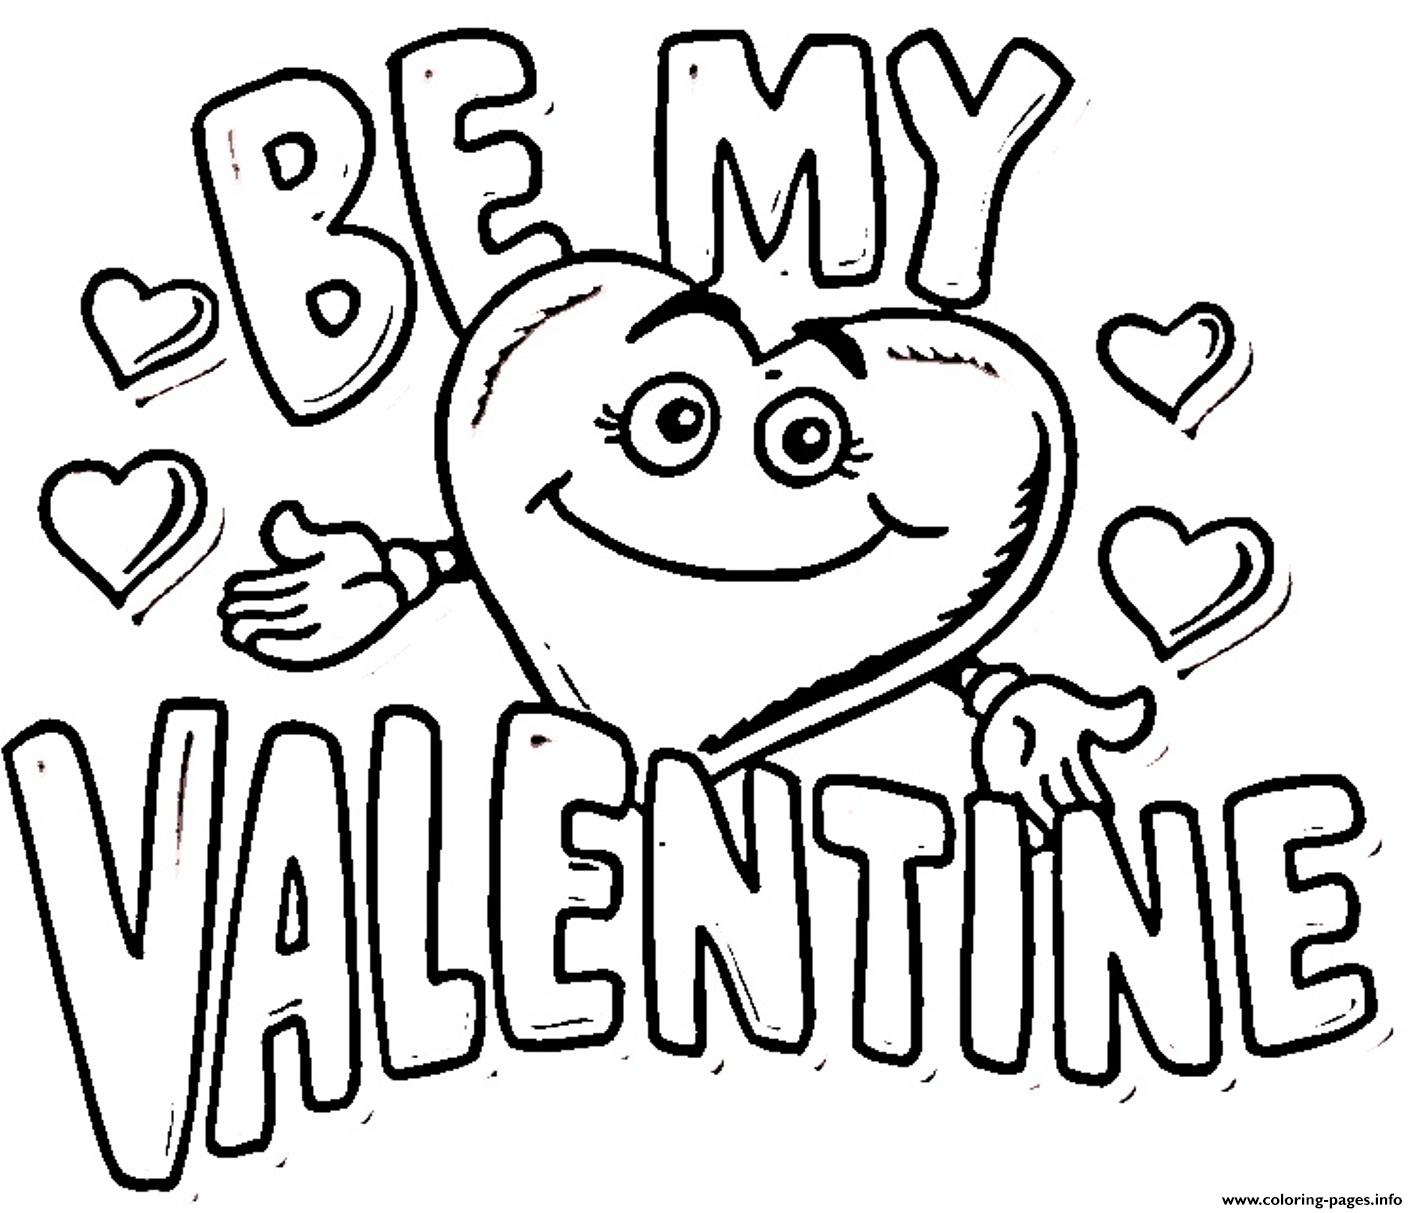 Be Mine Valentine Valentines Day Coloring Page coloring